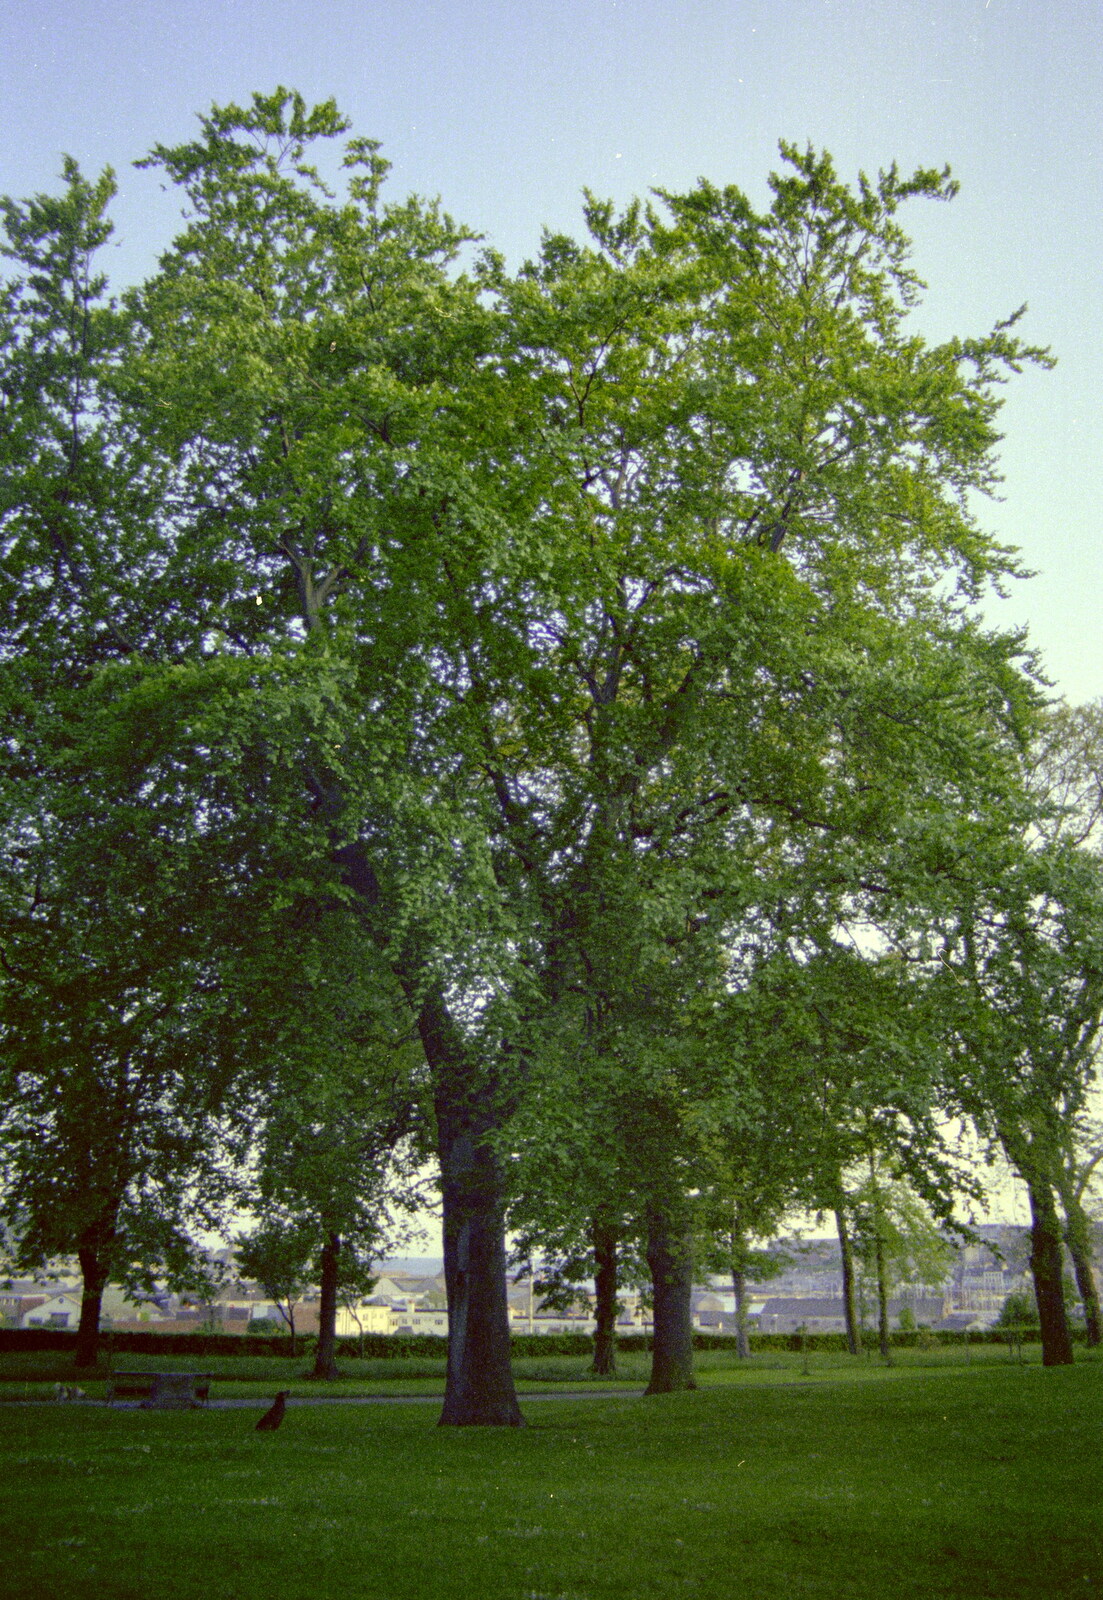 Spring trees in Beaumont Park from Uni: Scenes of Plymouth and the PPSU Bar, Plymouth Polytechnic, Devon - 28th April 1986